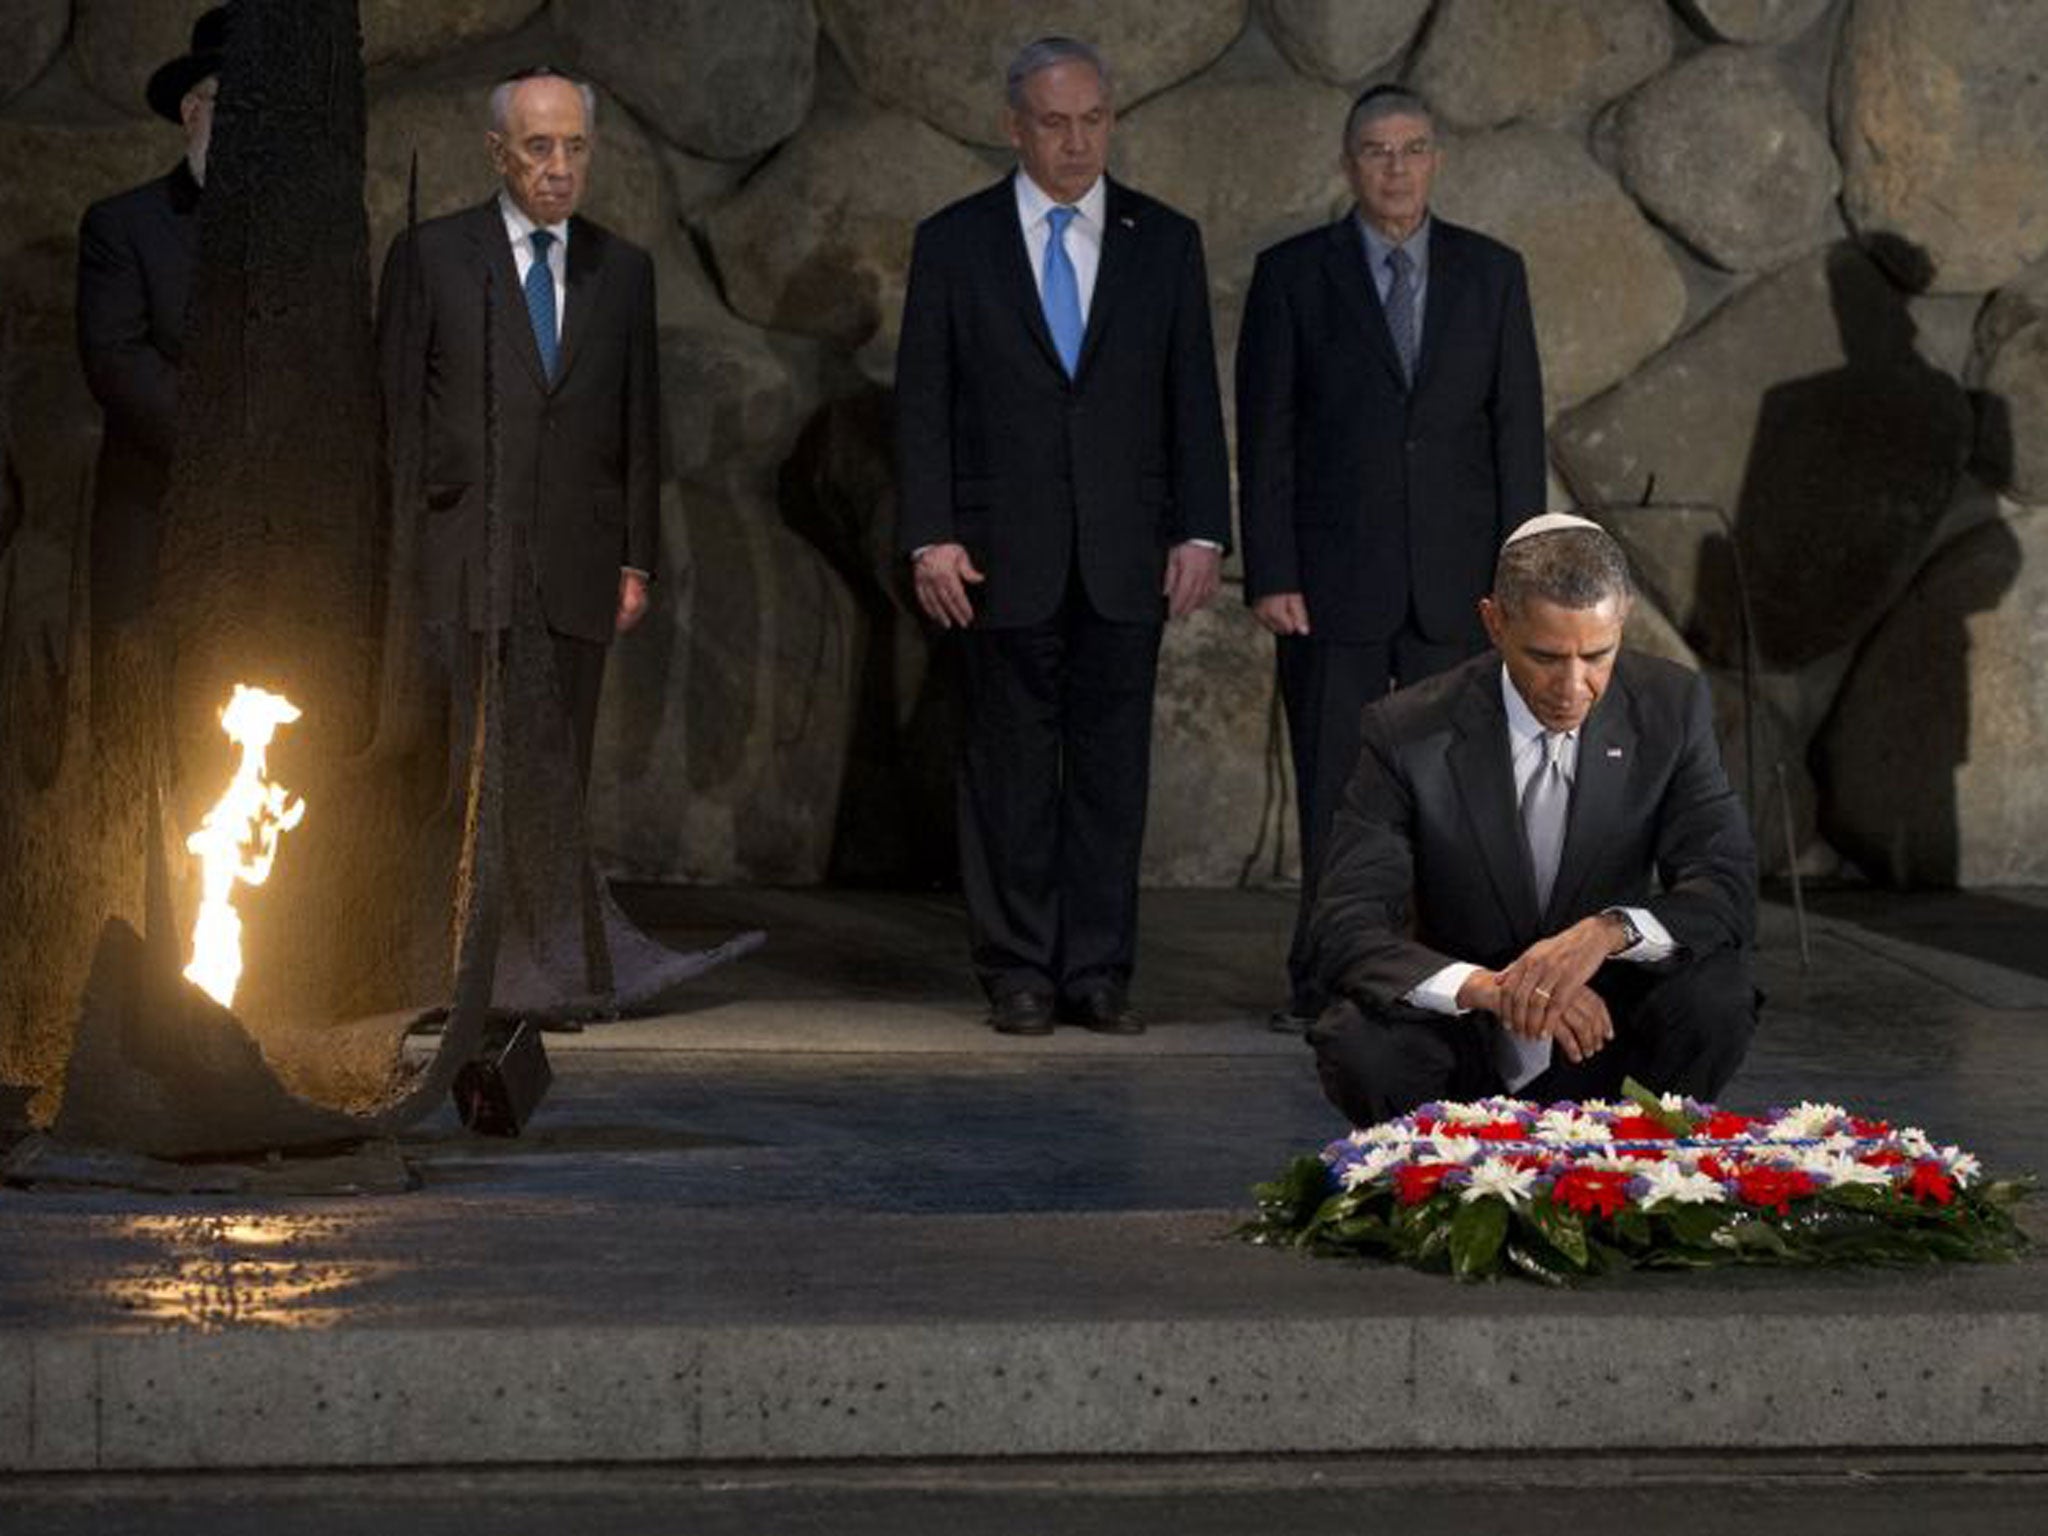 Barack Obama lays a wreath in the Hall of Remembrance at the Yad Vashem Holocaust Museum